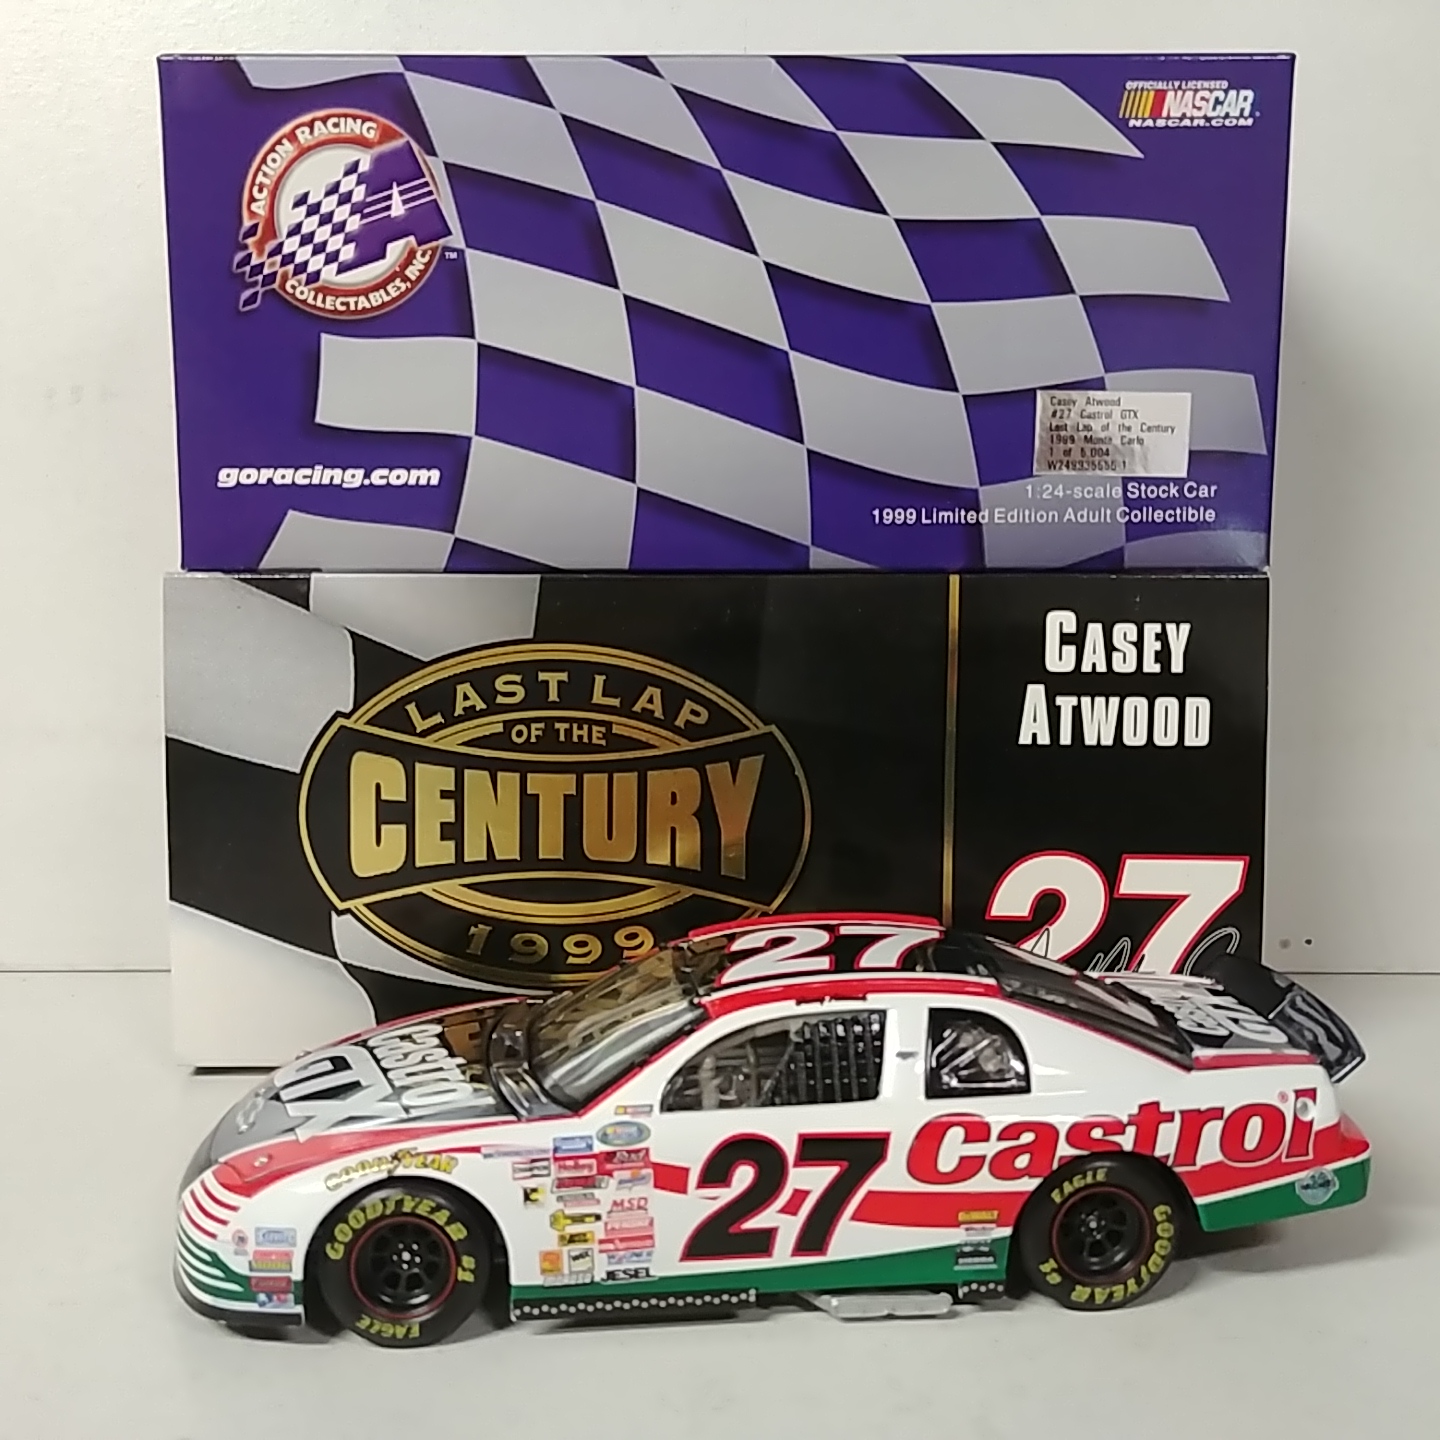 1999 Casey Atwood 1/24th Castrol GTX "Last Lap of the Century" "Busch Series" Monte Carlo